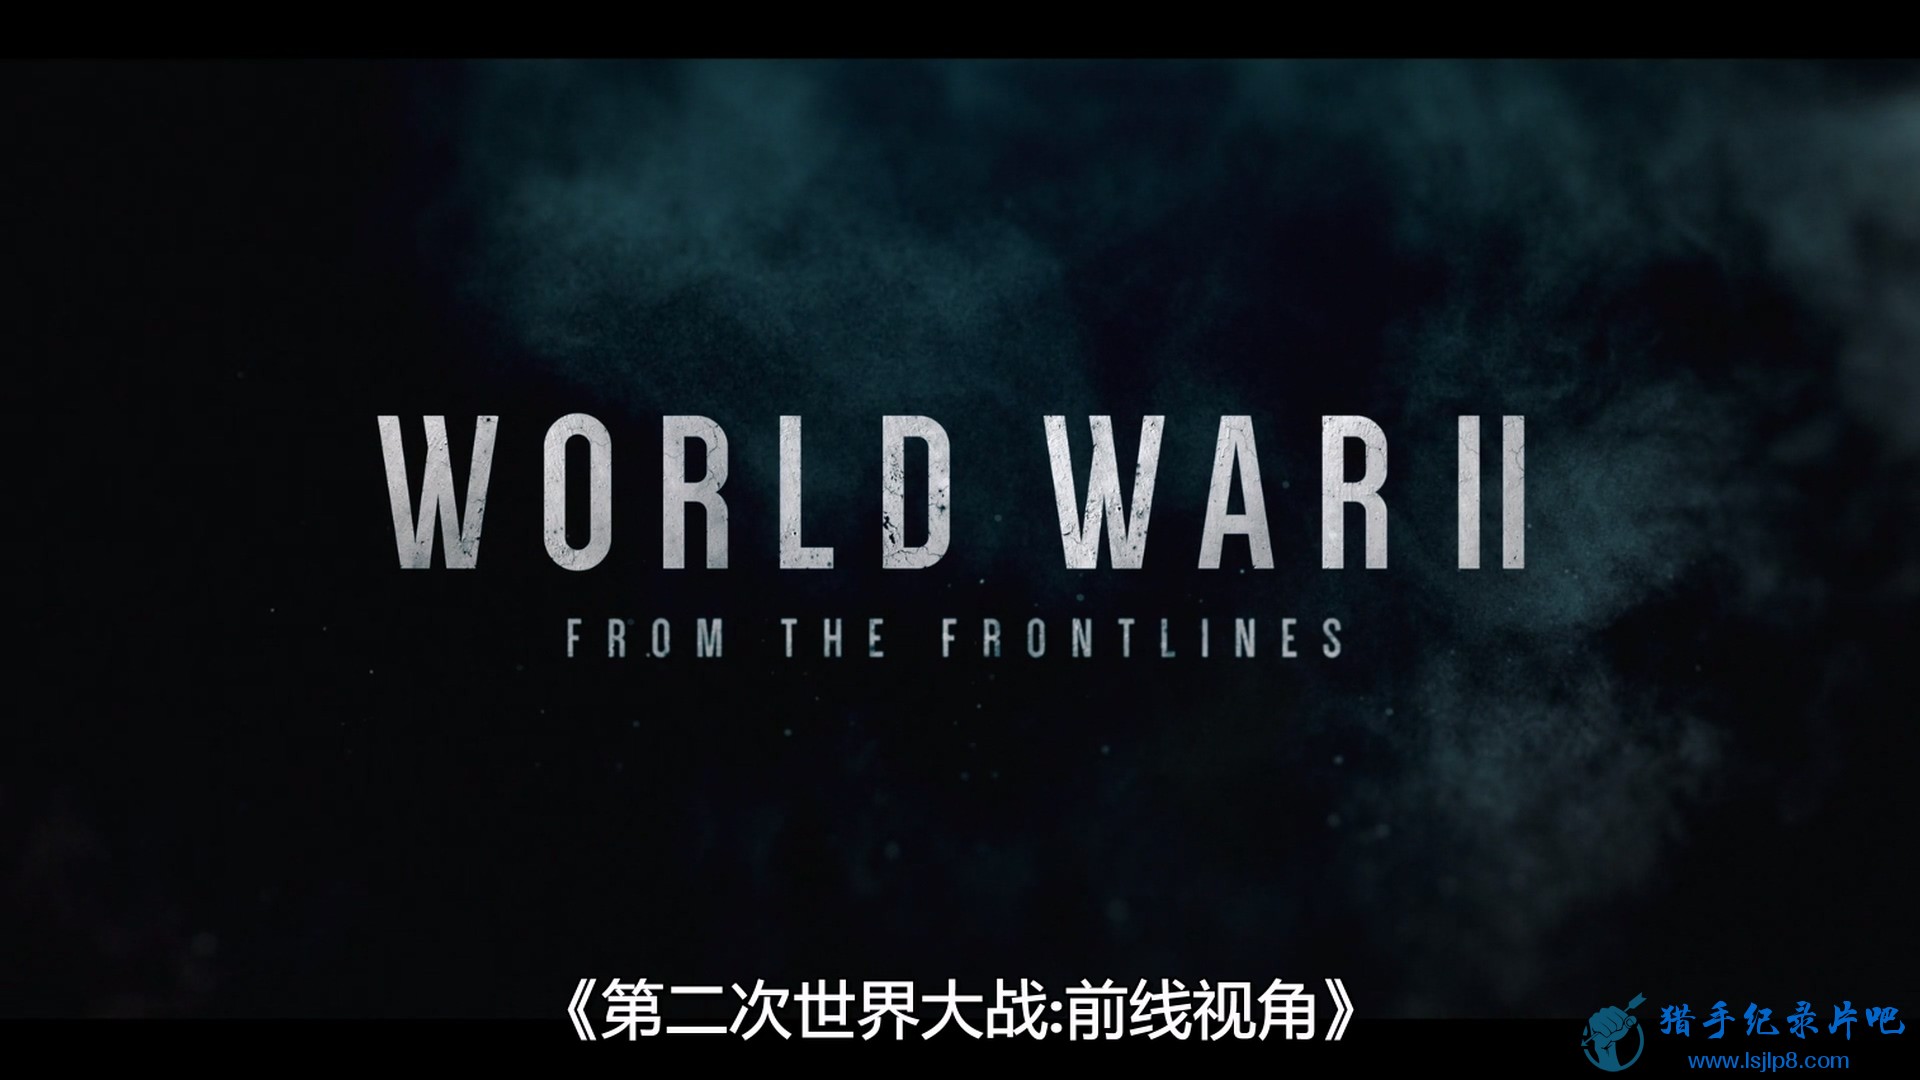 World.War.II.From.the.Frontlines.S01E01.The.Master.Race.1080p.NF.WEB-DL.DD 5.1.A.jpg